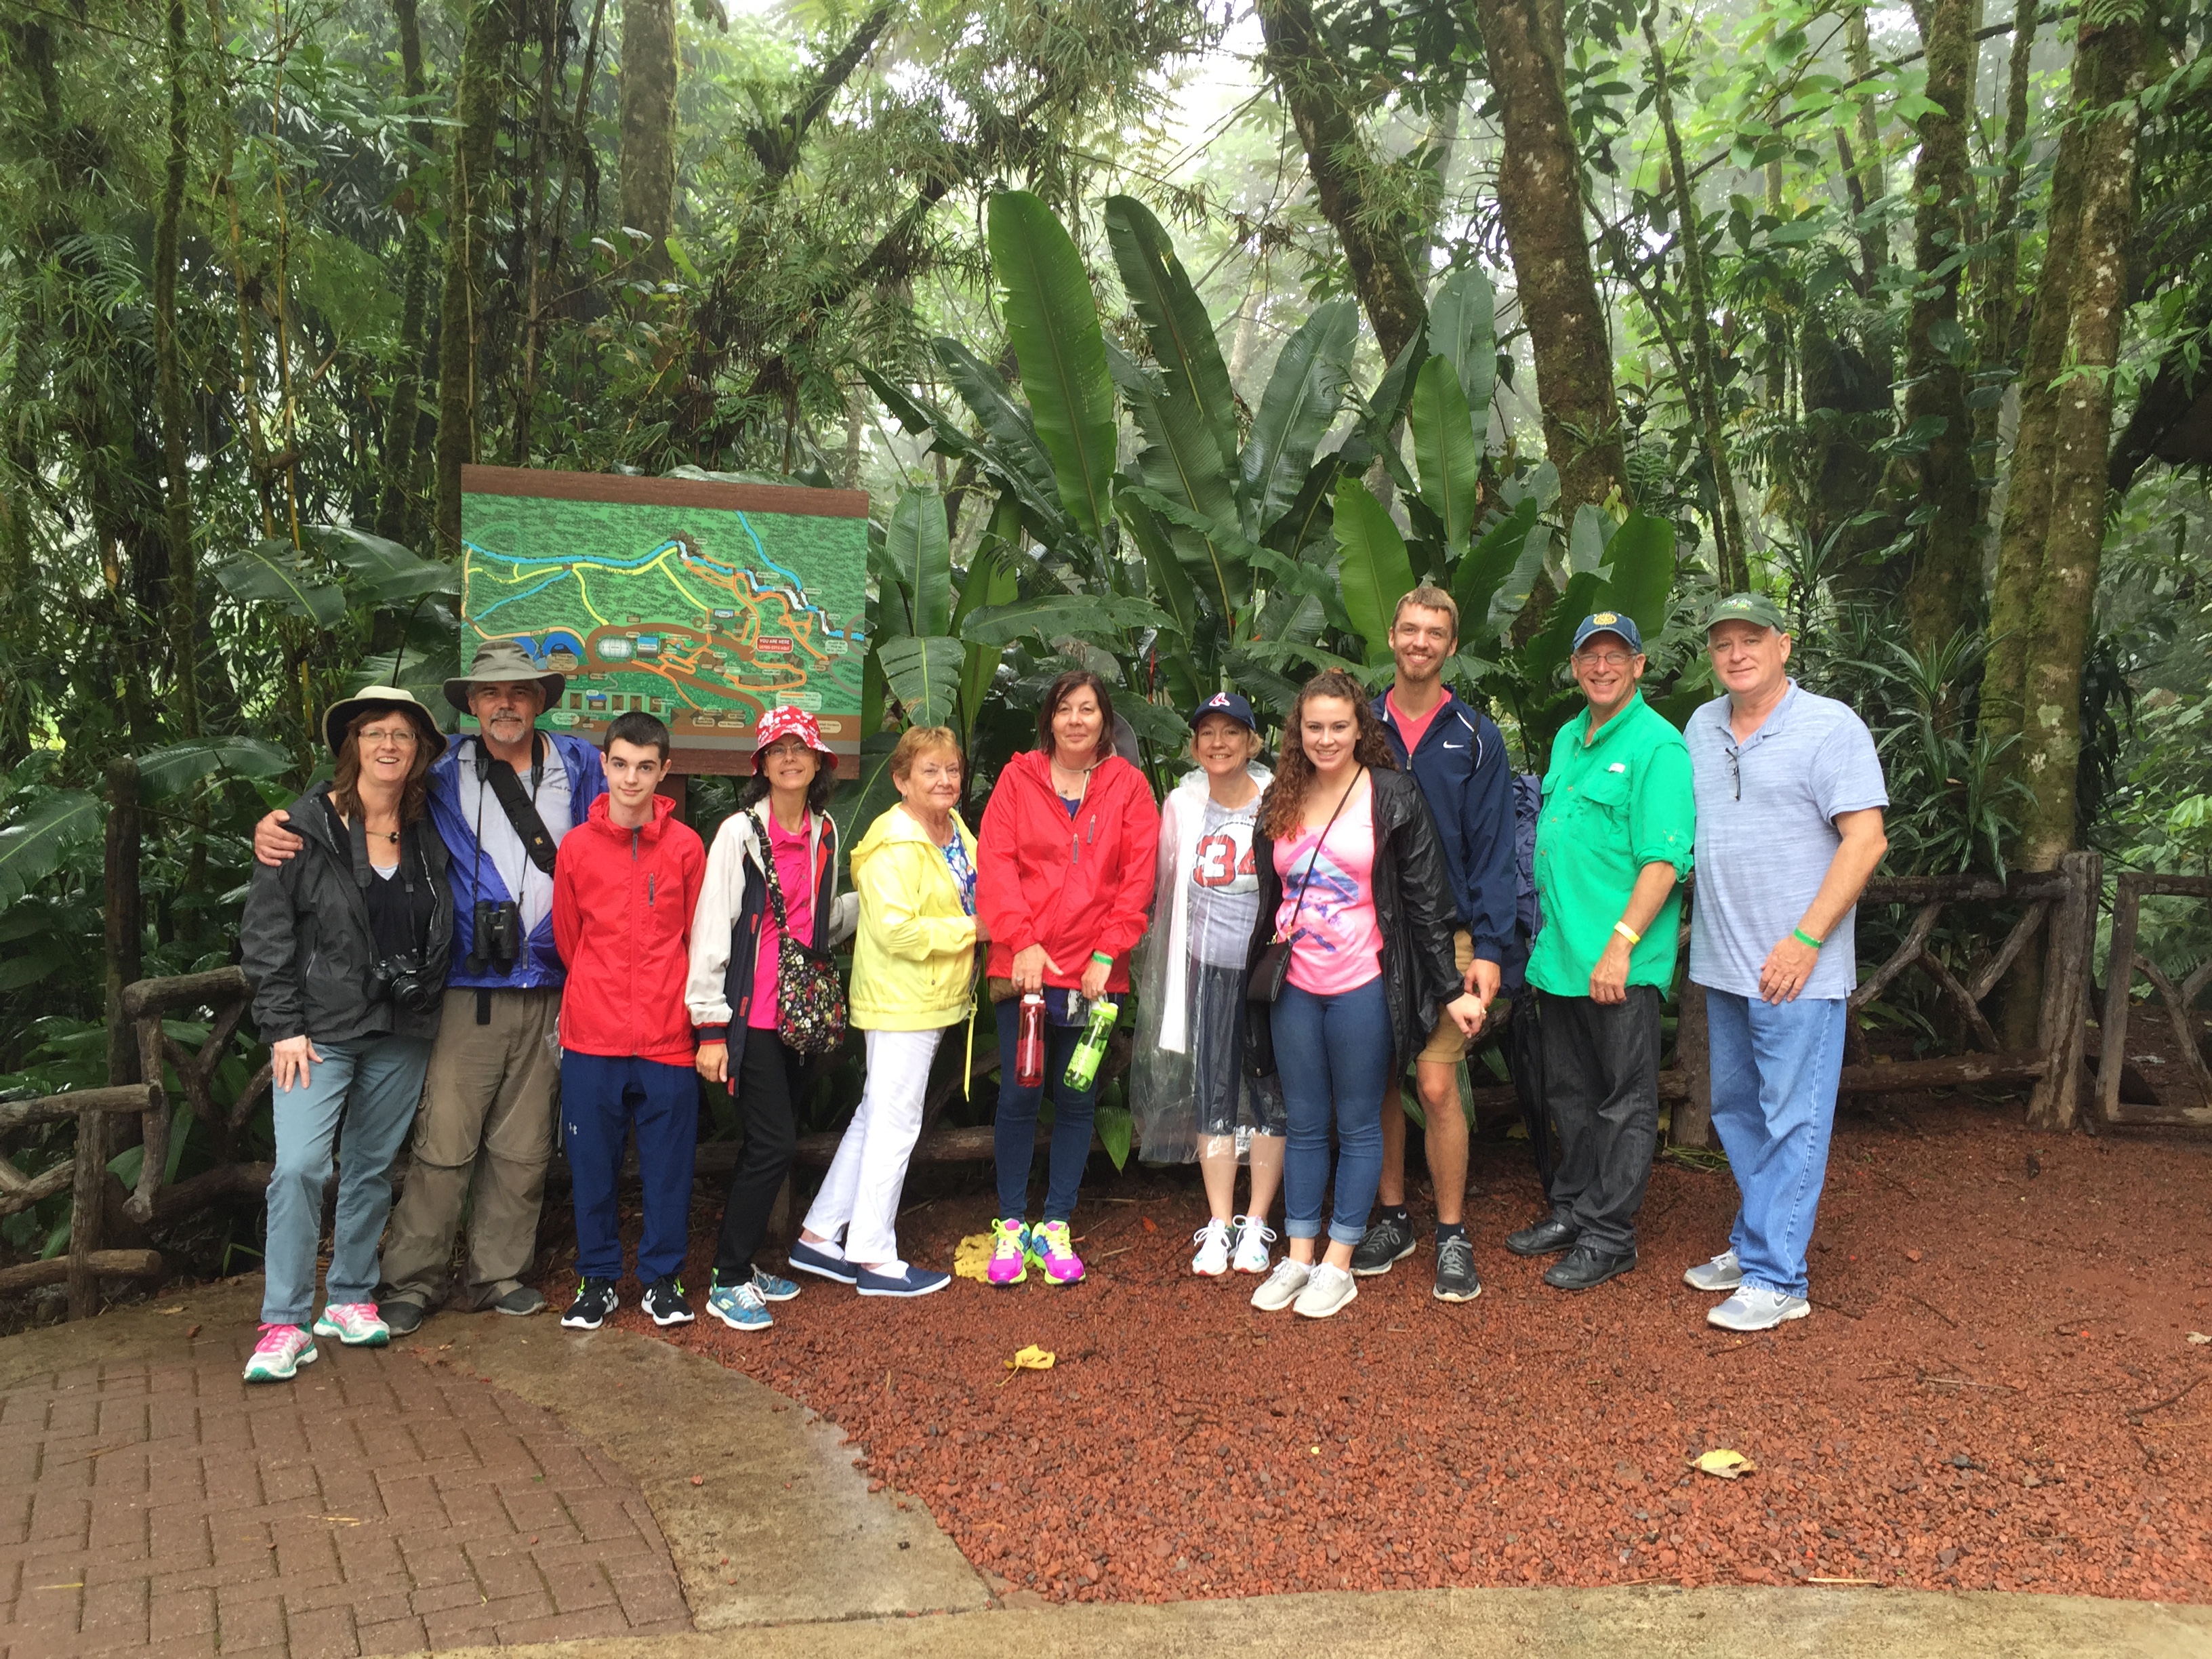 Our team at the La Paz Waterfall Garden.